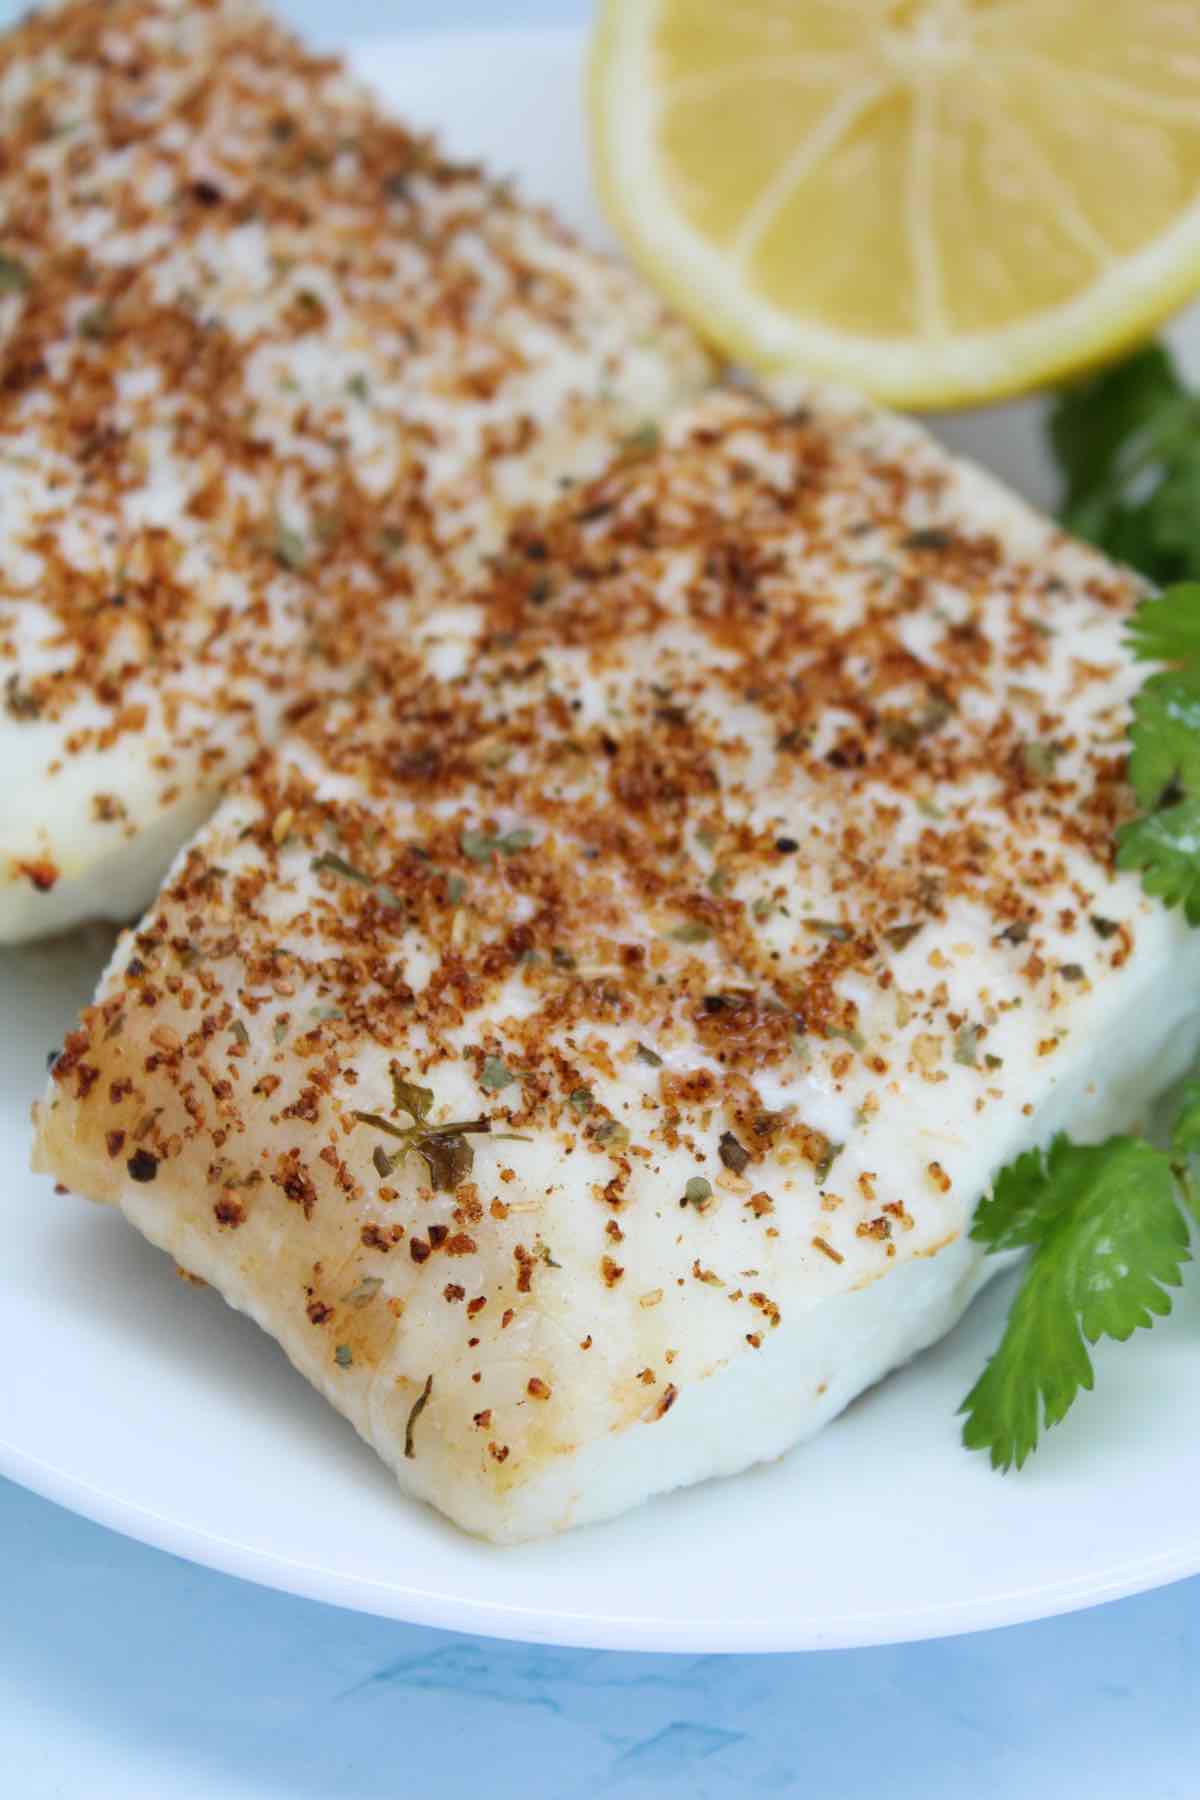 An easy air fryer halibut recipe made with just 4 ingredients in under 10 minutes.